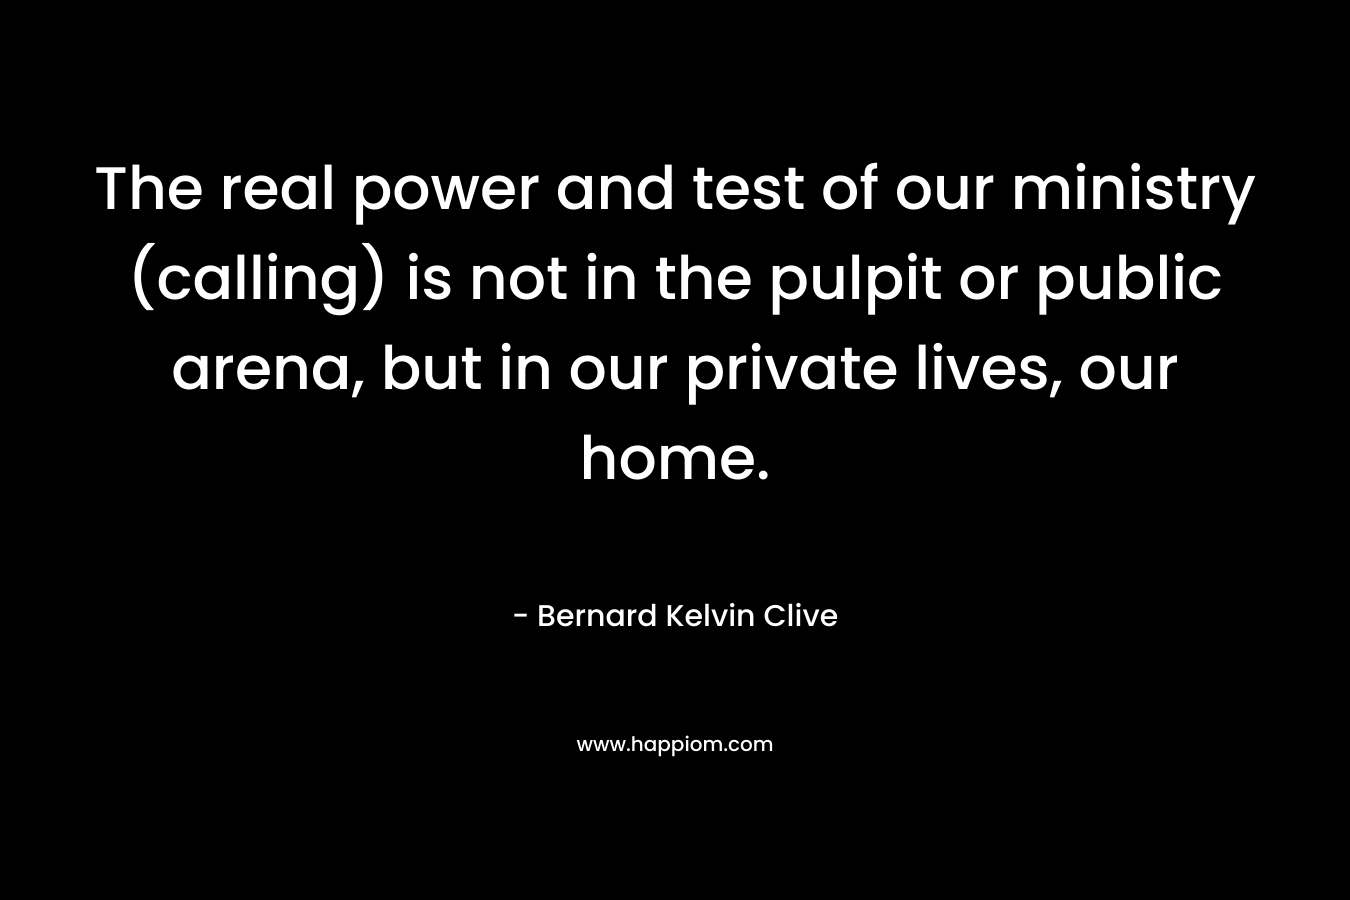 The real power and test of our ministry (calling) is not in the pulpit or public arena, but in our private lives, our home. – Bernard Kelvin Clive